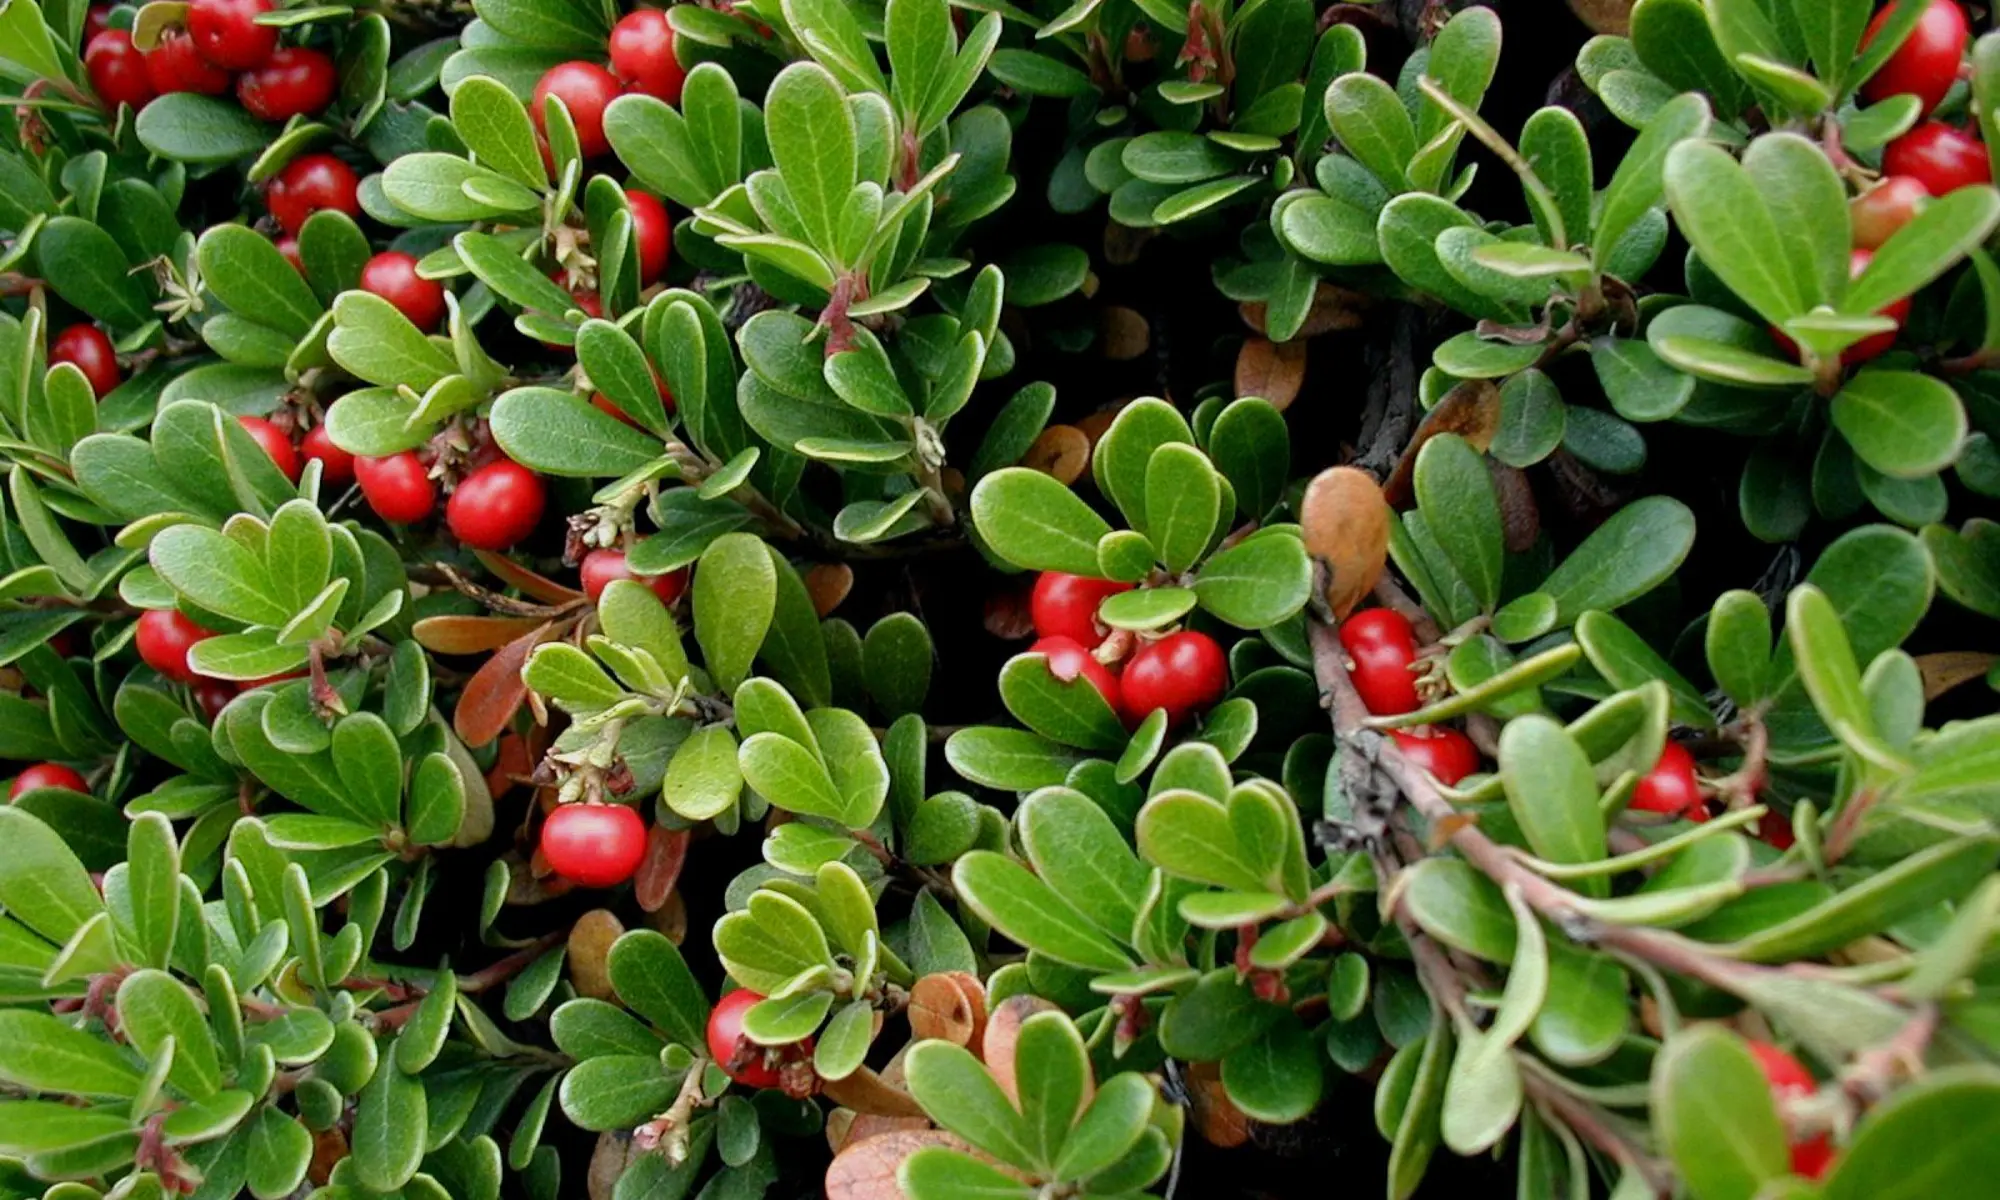 A wallpaper view of uva ursi berries and leaves.